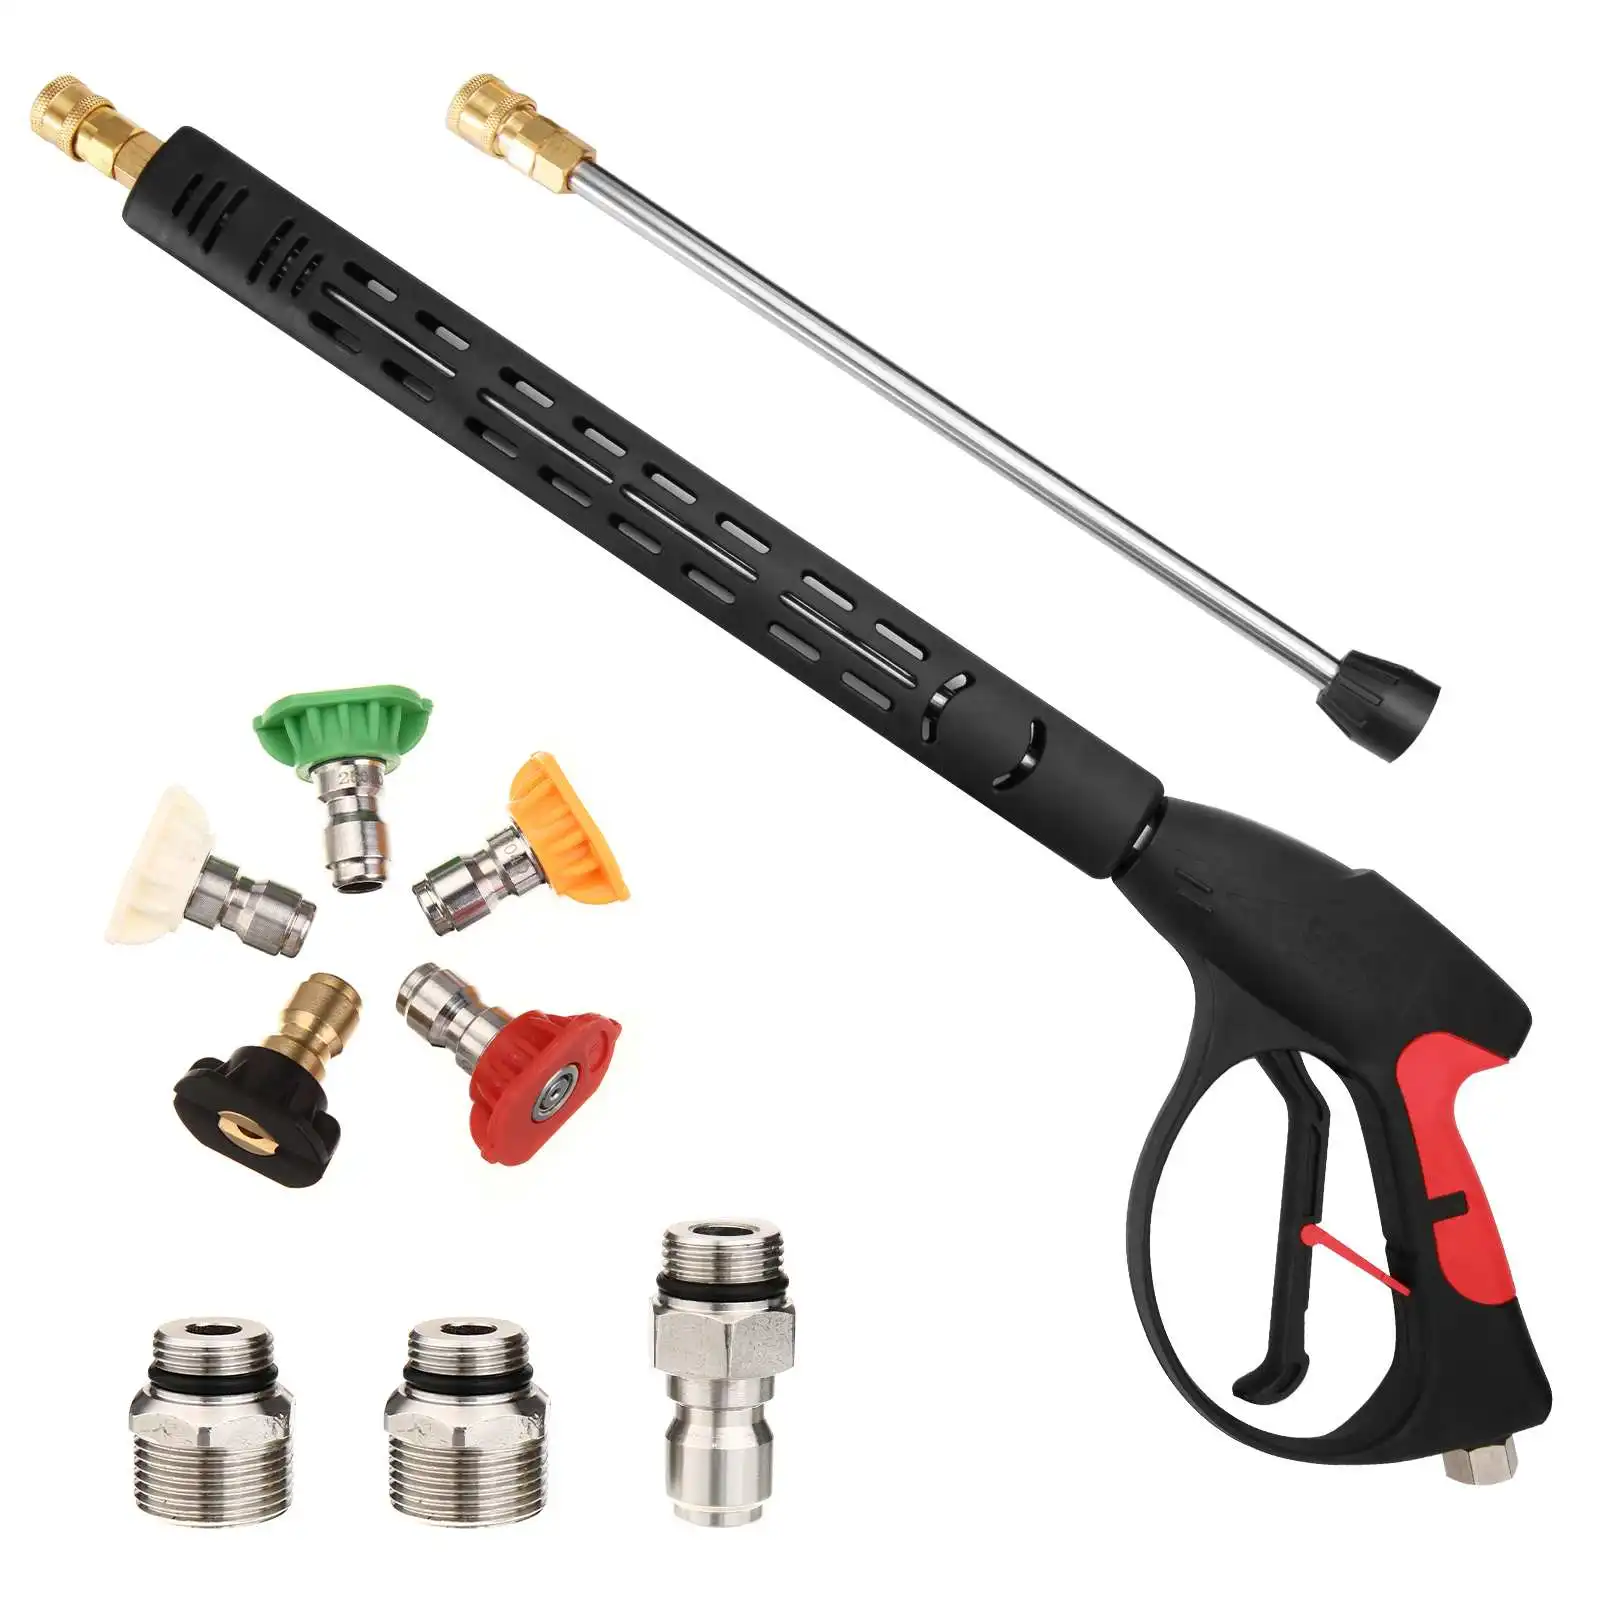 

High Pressure Snow Foam Gun Car Washer With 1/4" Quick Release M22-14mm Inlet and 3/8" Quick Inlet Connector Soap Spray Nozzles